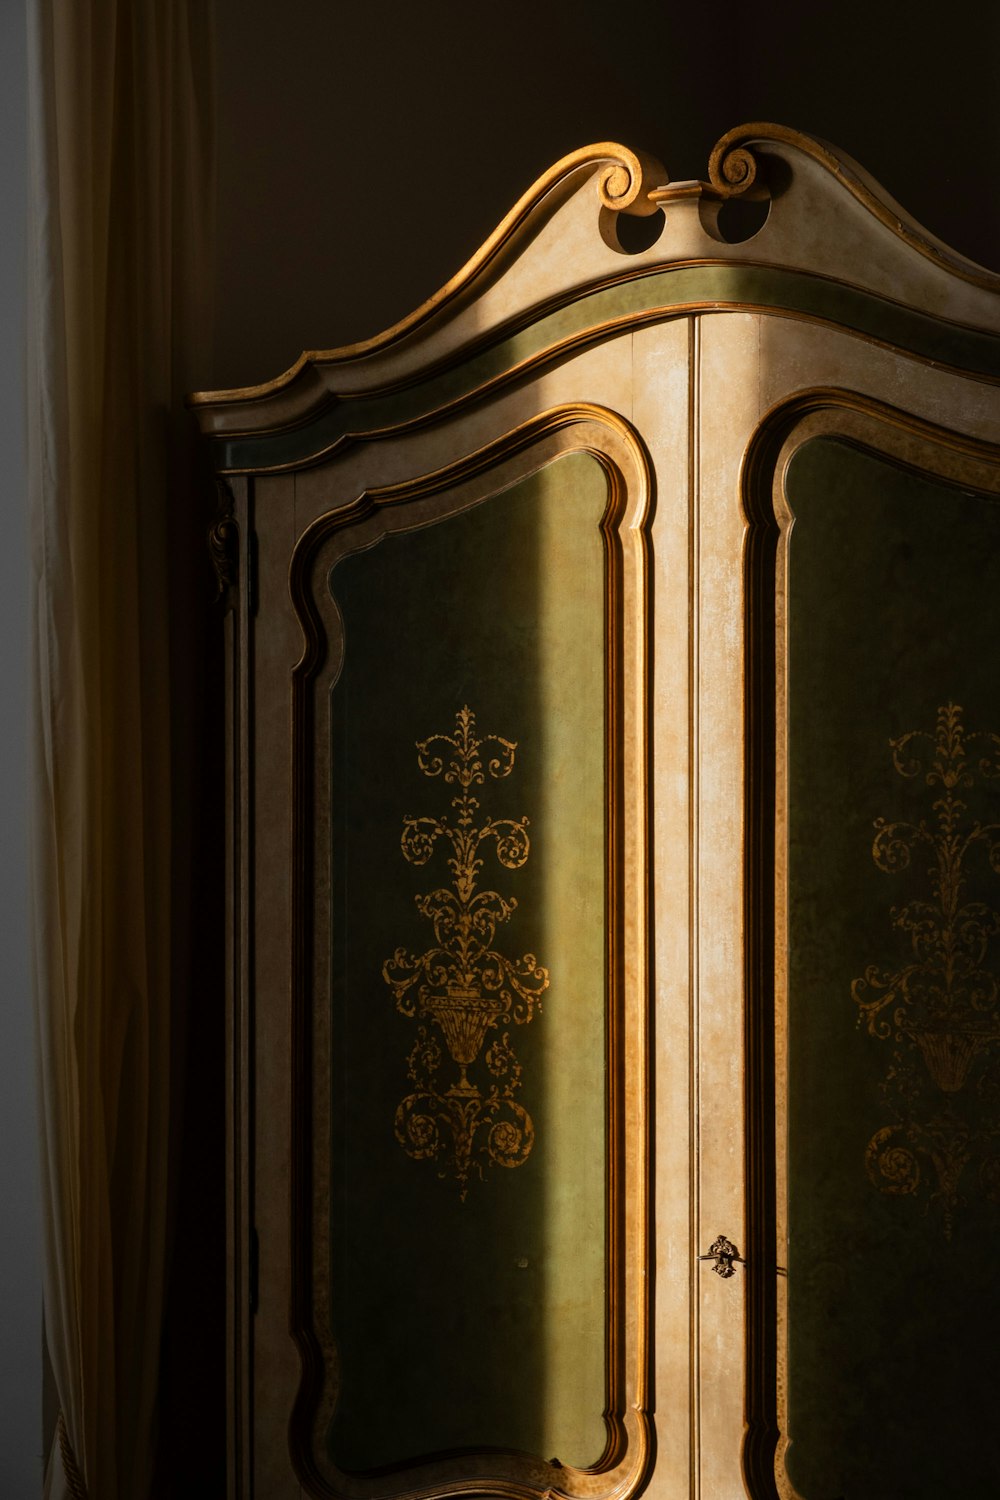 a gold and black armoire with ornate designs